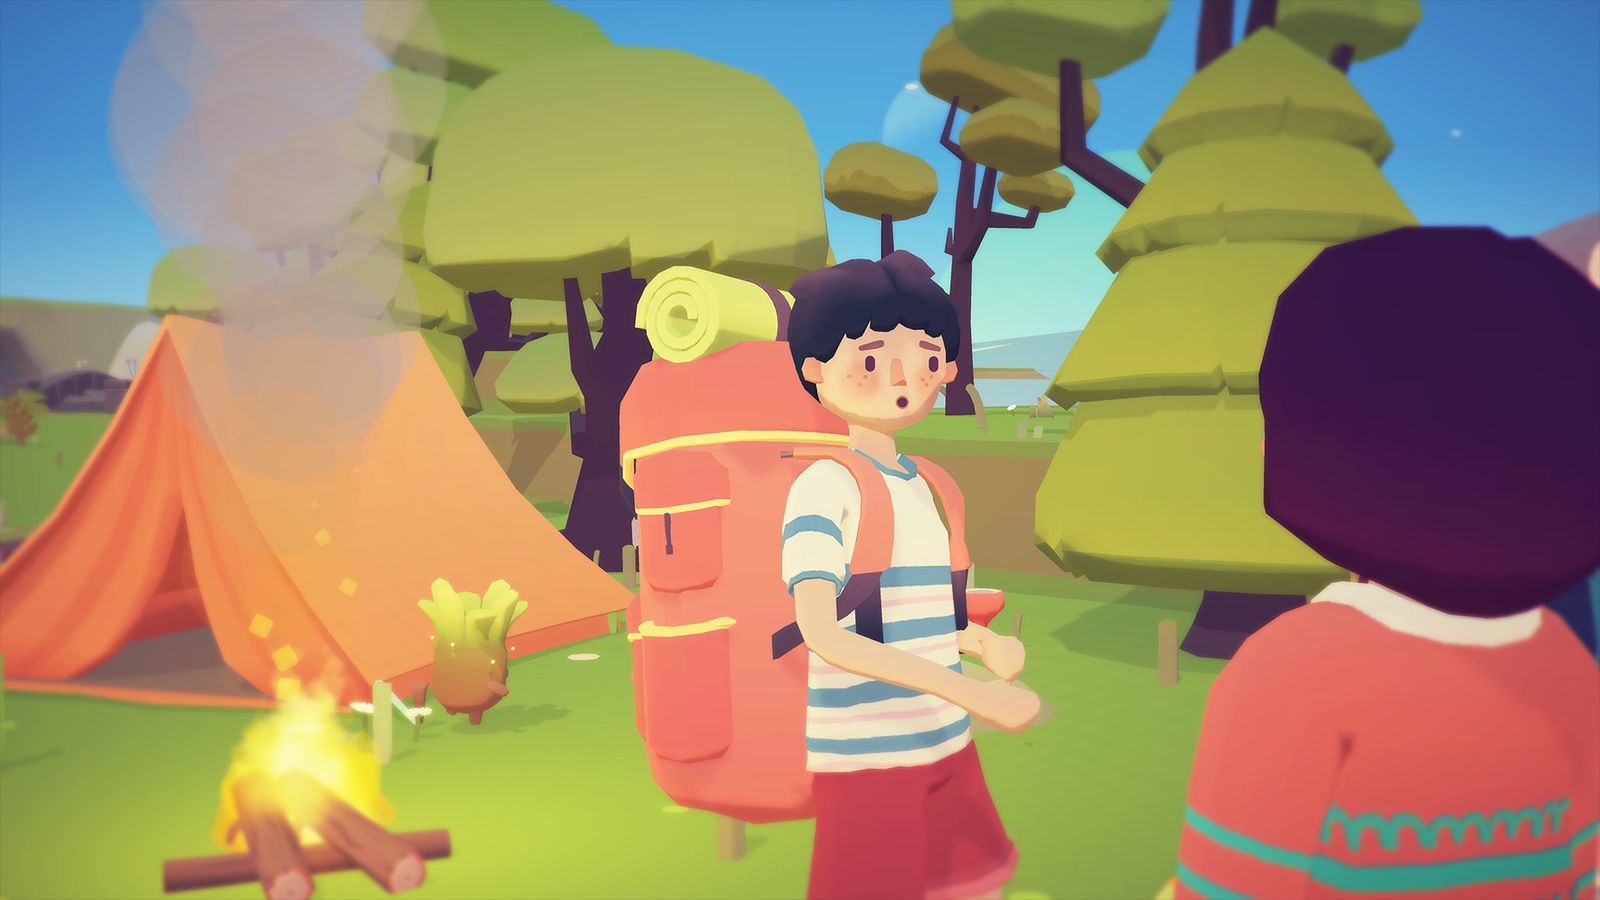 In-game image from Ooblets of a character in a white and blue striped shirt wearing a pink backpack conversing with another character in front of a tent and a fire.